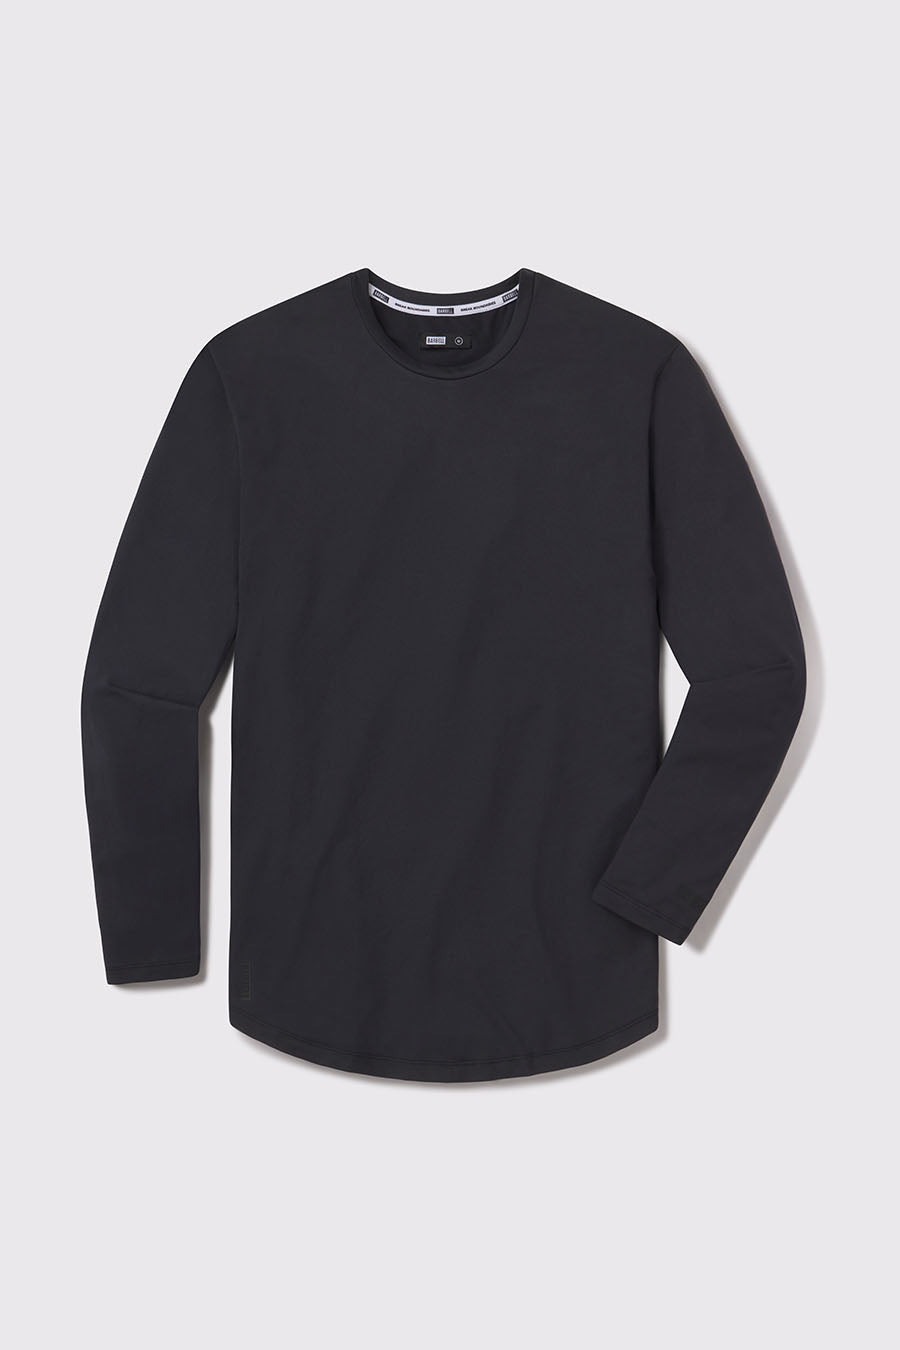 Havok Long Sleeve - Black - photo from front flat lay #color_black